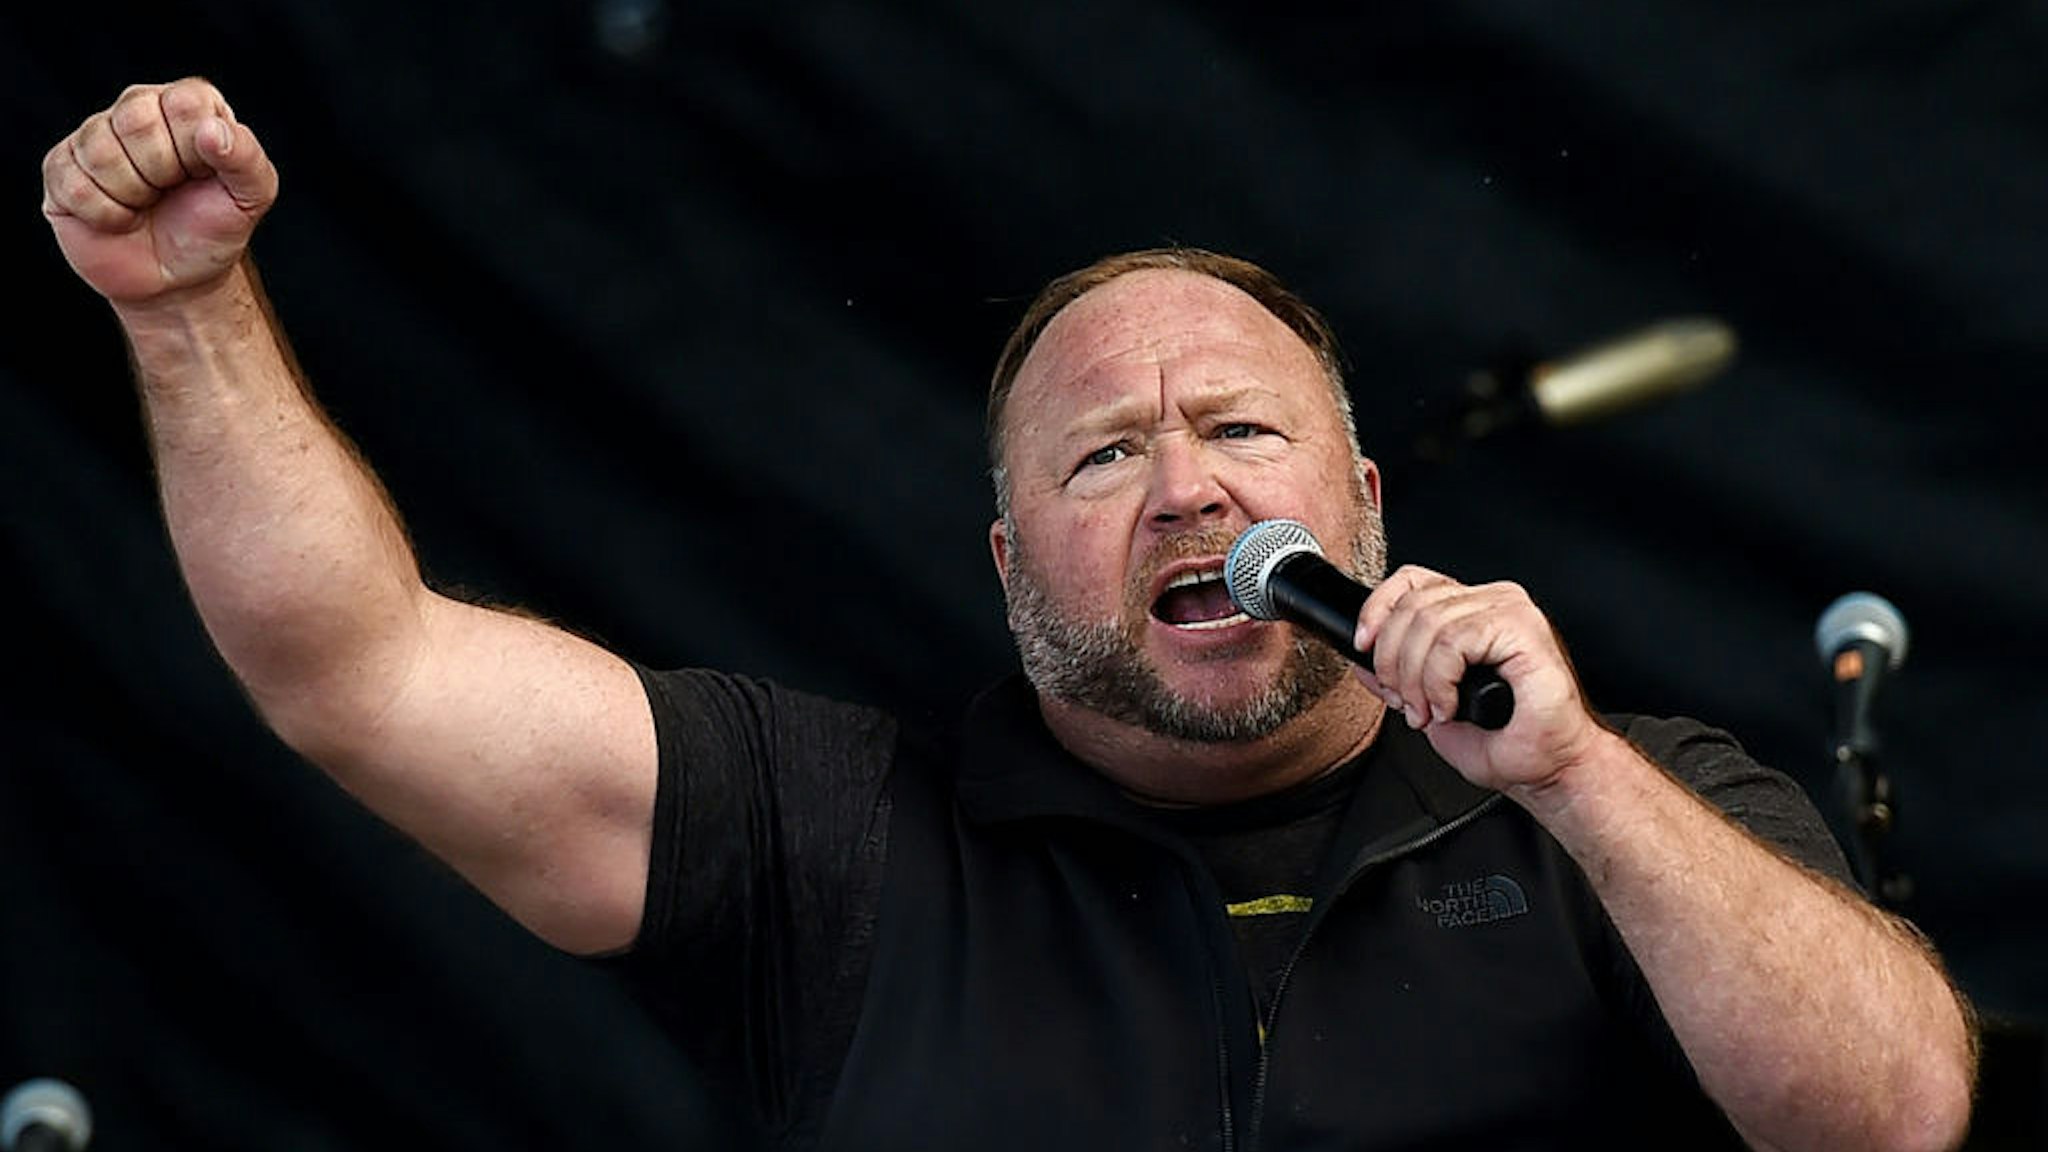 US far-right radio show Alex Jones speaks to supporters of US President Donald Trump as they demonstrate in Washington, DC, on December 12, 2020, to protest the 2020 election. (Photo by Olivier DOULIERY / AFP) (Photo by OLIVIER DOULIERY/AFP via Getty Images)